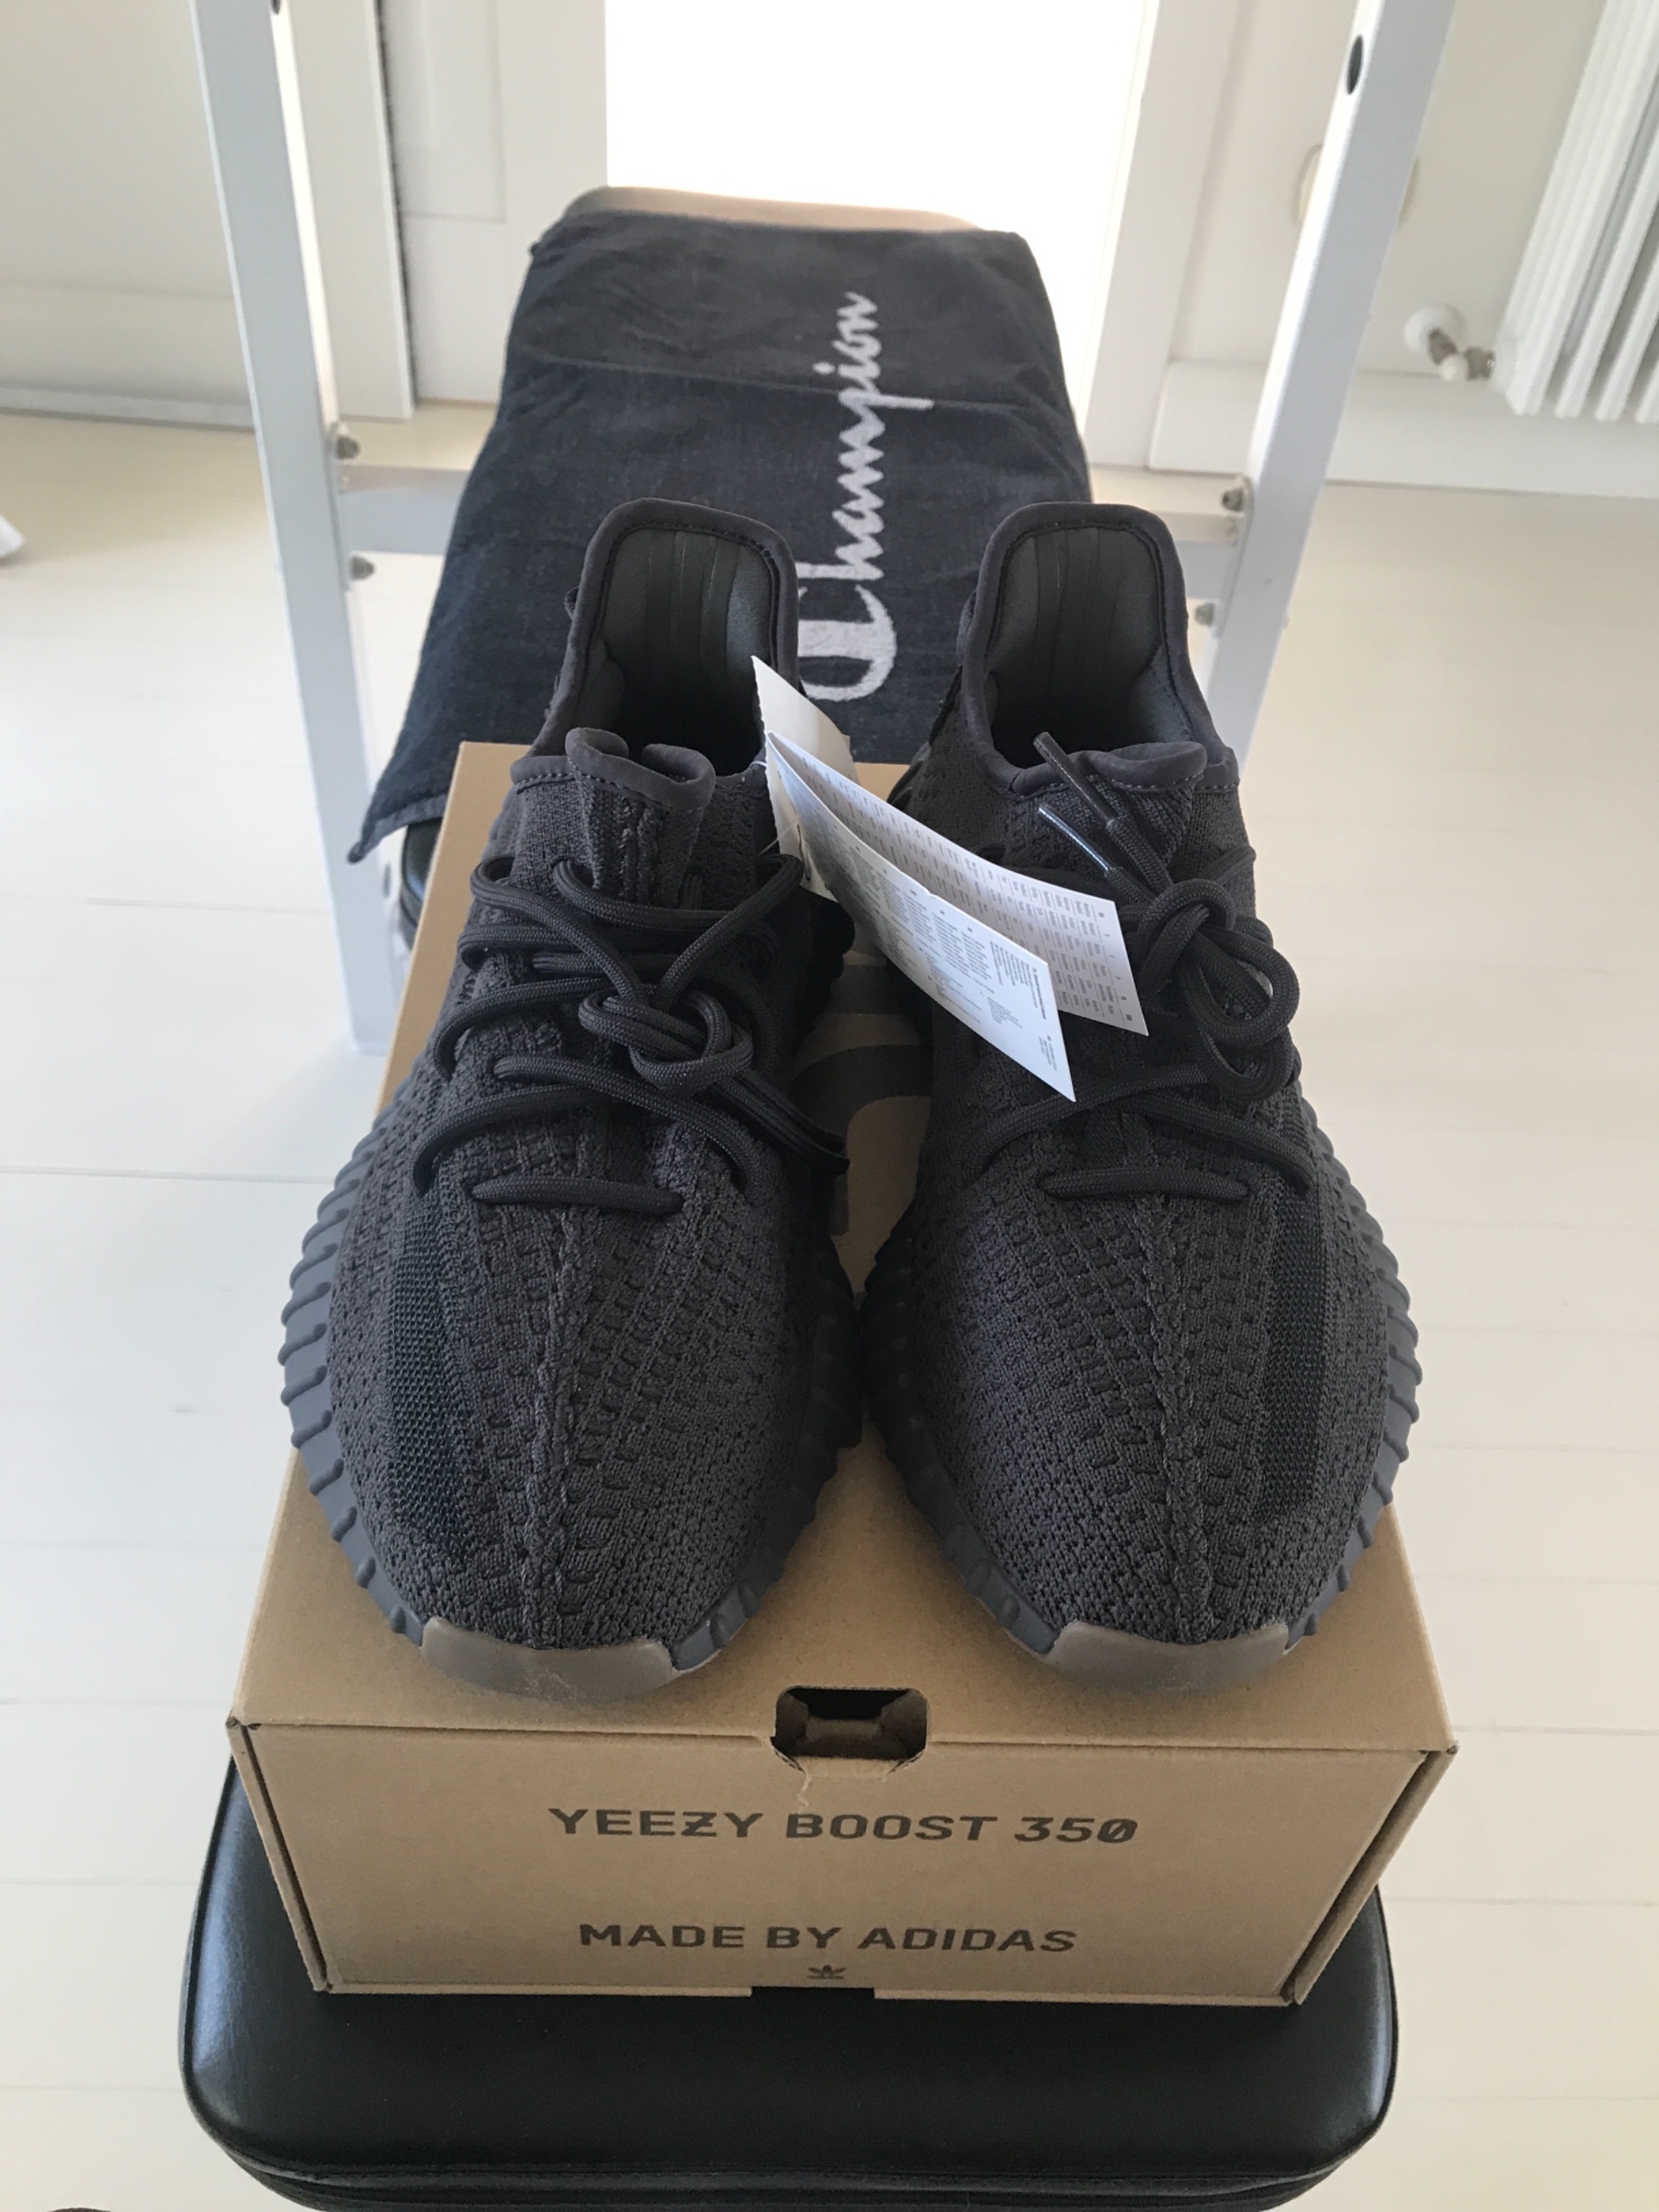 Cheap Adidas Yeezy Boost Zebra 350 V2 Cp9654 New In Box From Confirmed